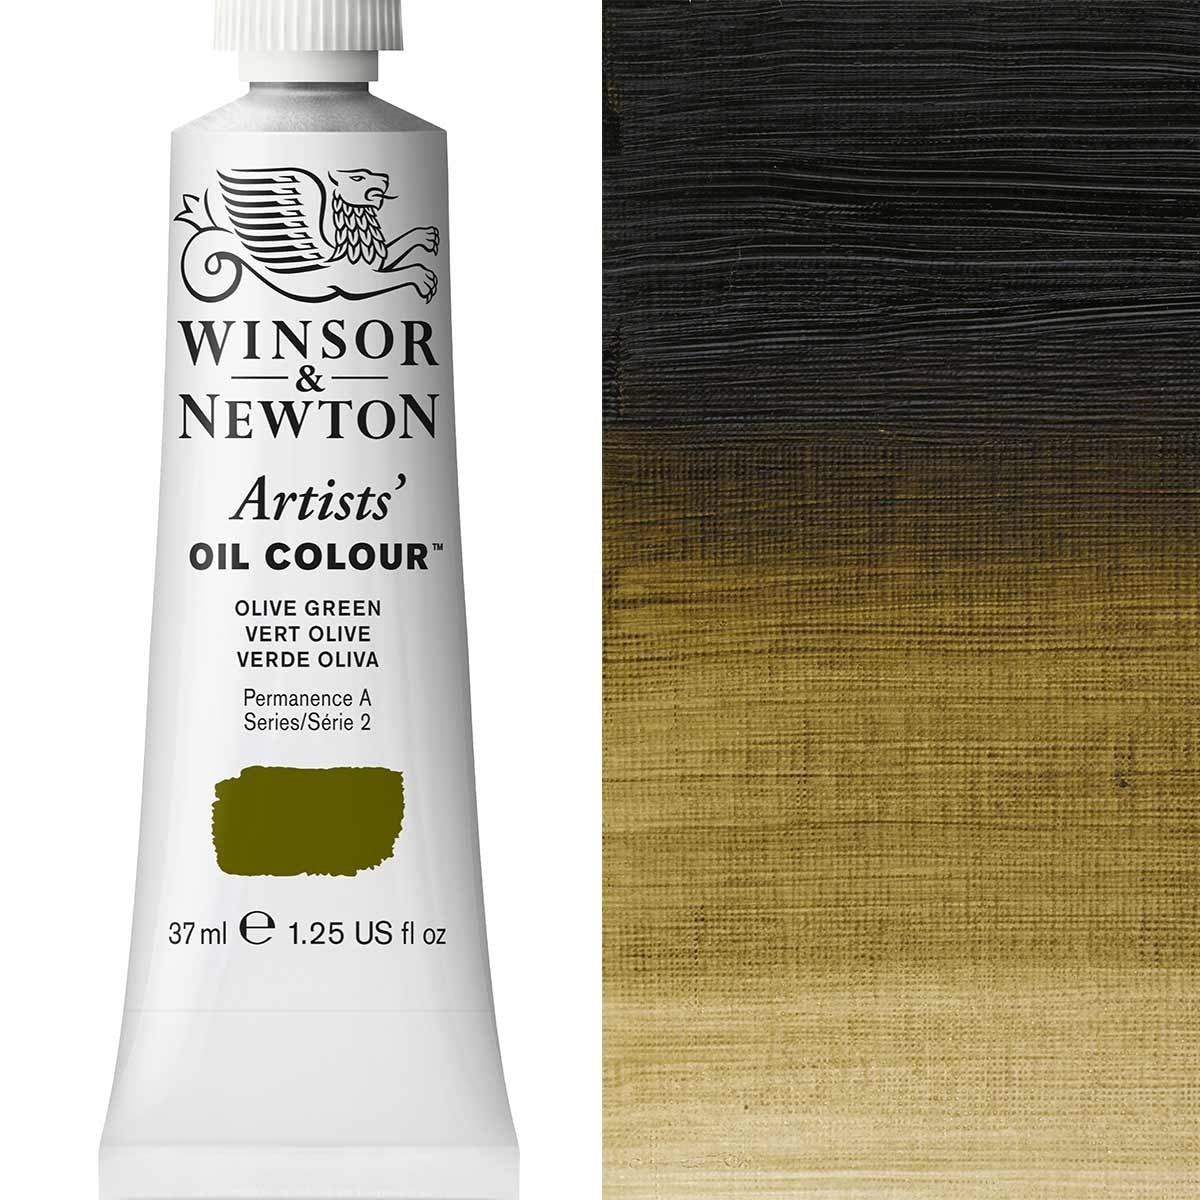 Winsor and Newton - Artists' Oil Colour - 37ml - Olive Green